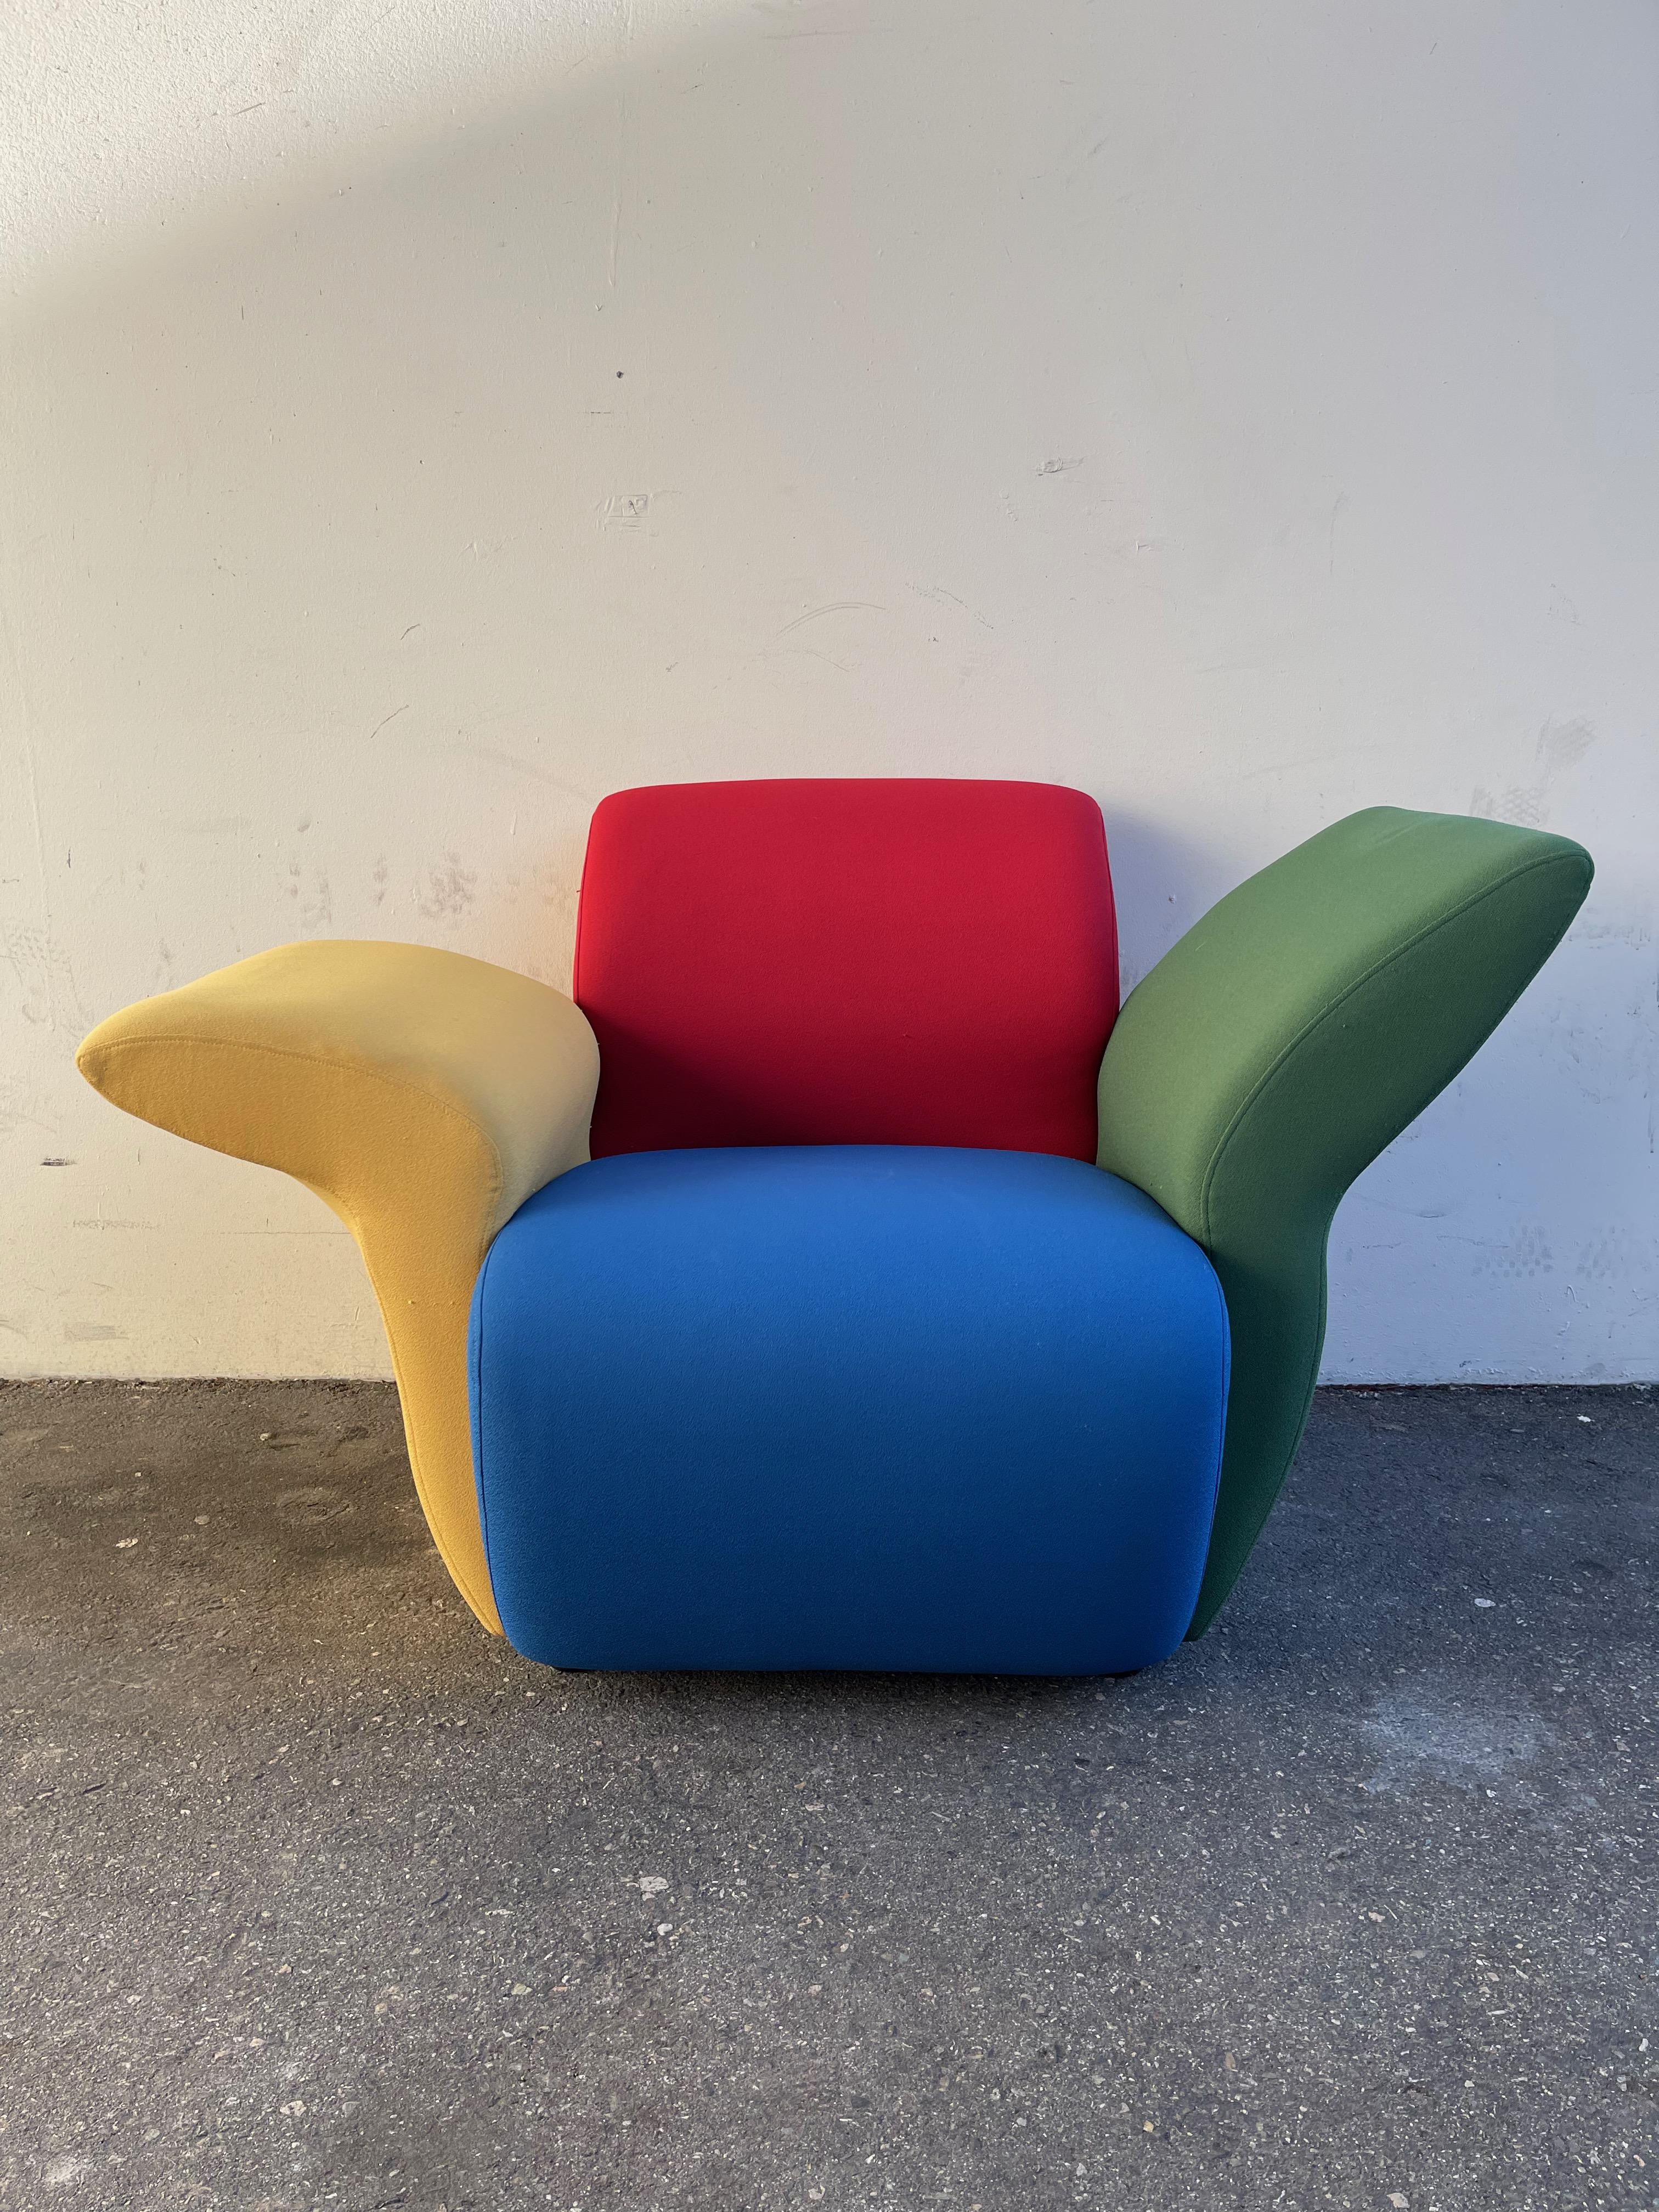 Post-Modern Postmodern Multicolor Lounge Chairs by David Burry, Montreal, 1980s For Sale